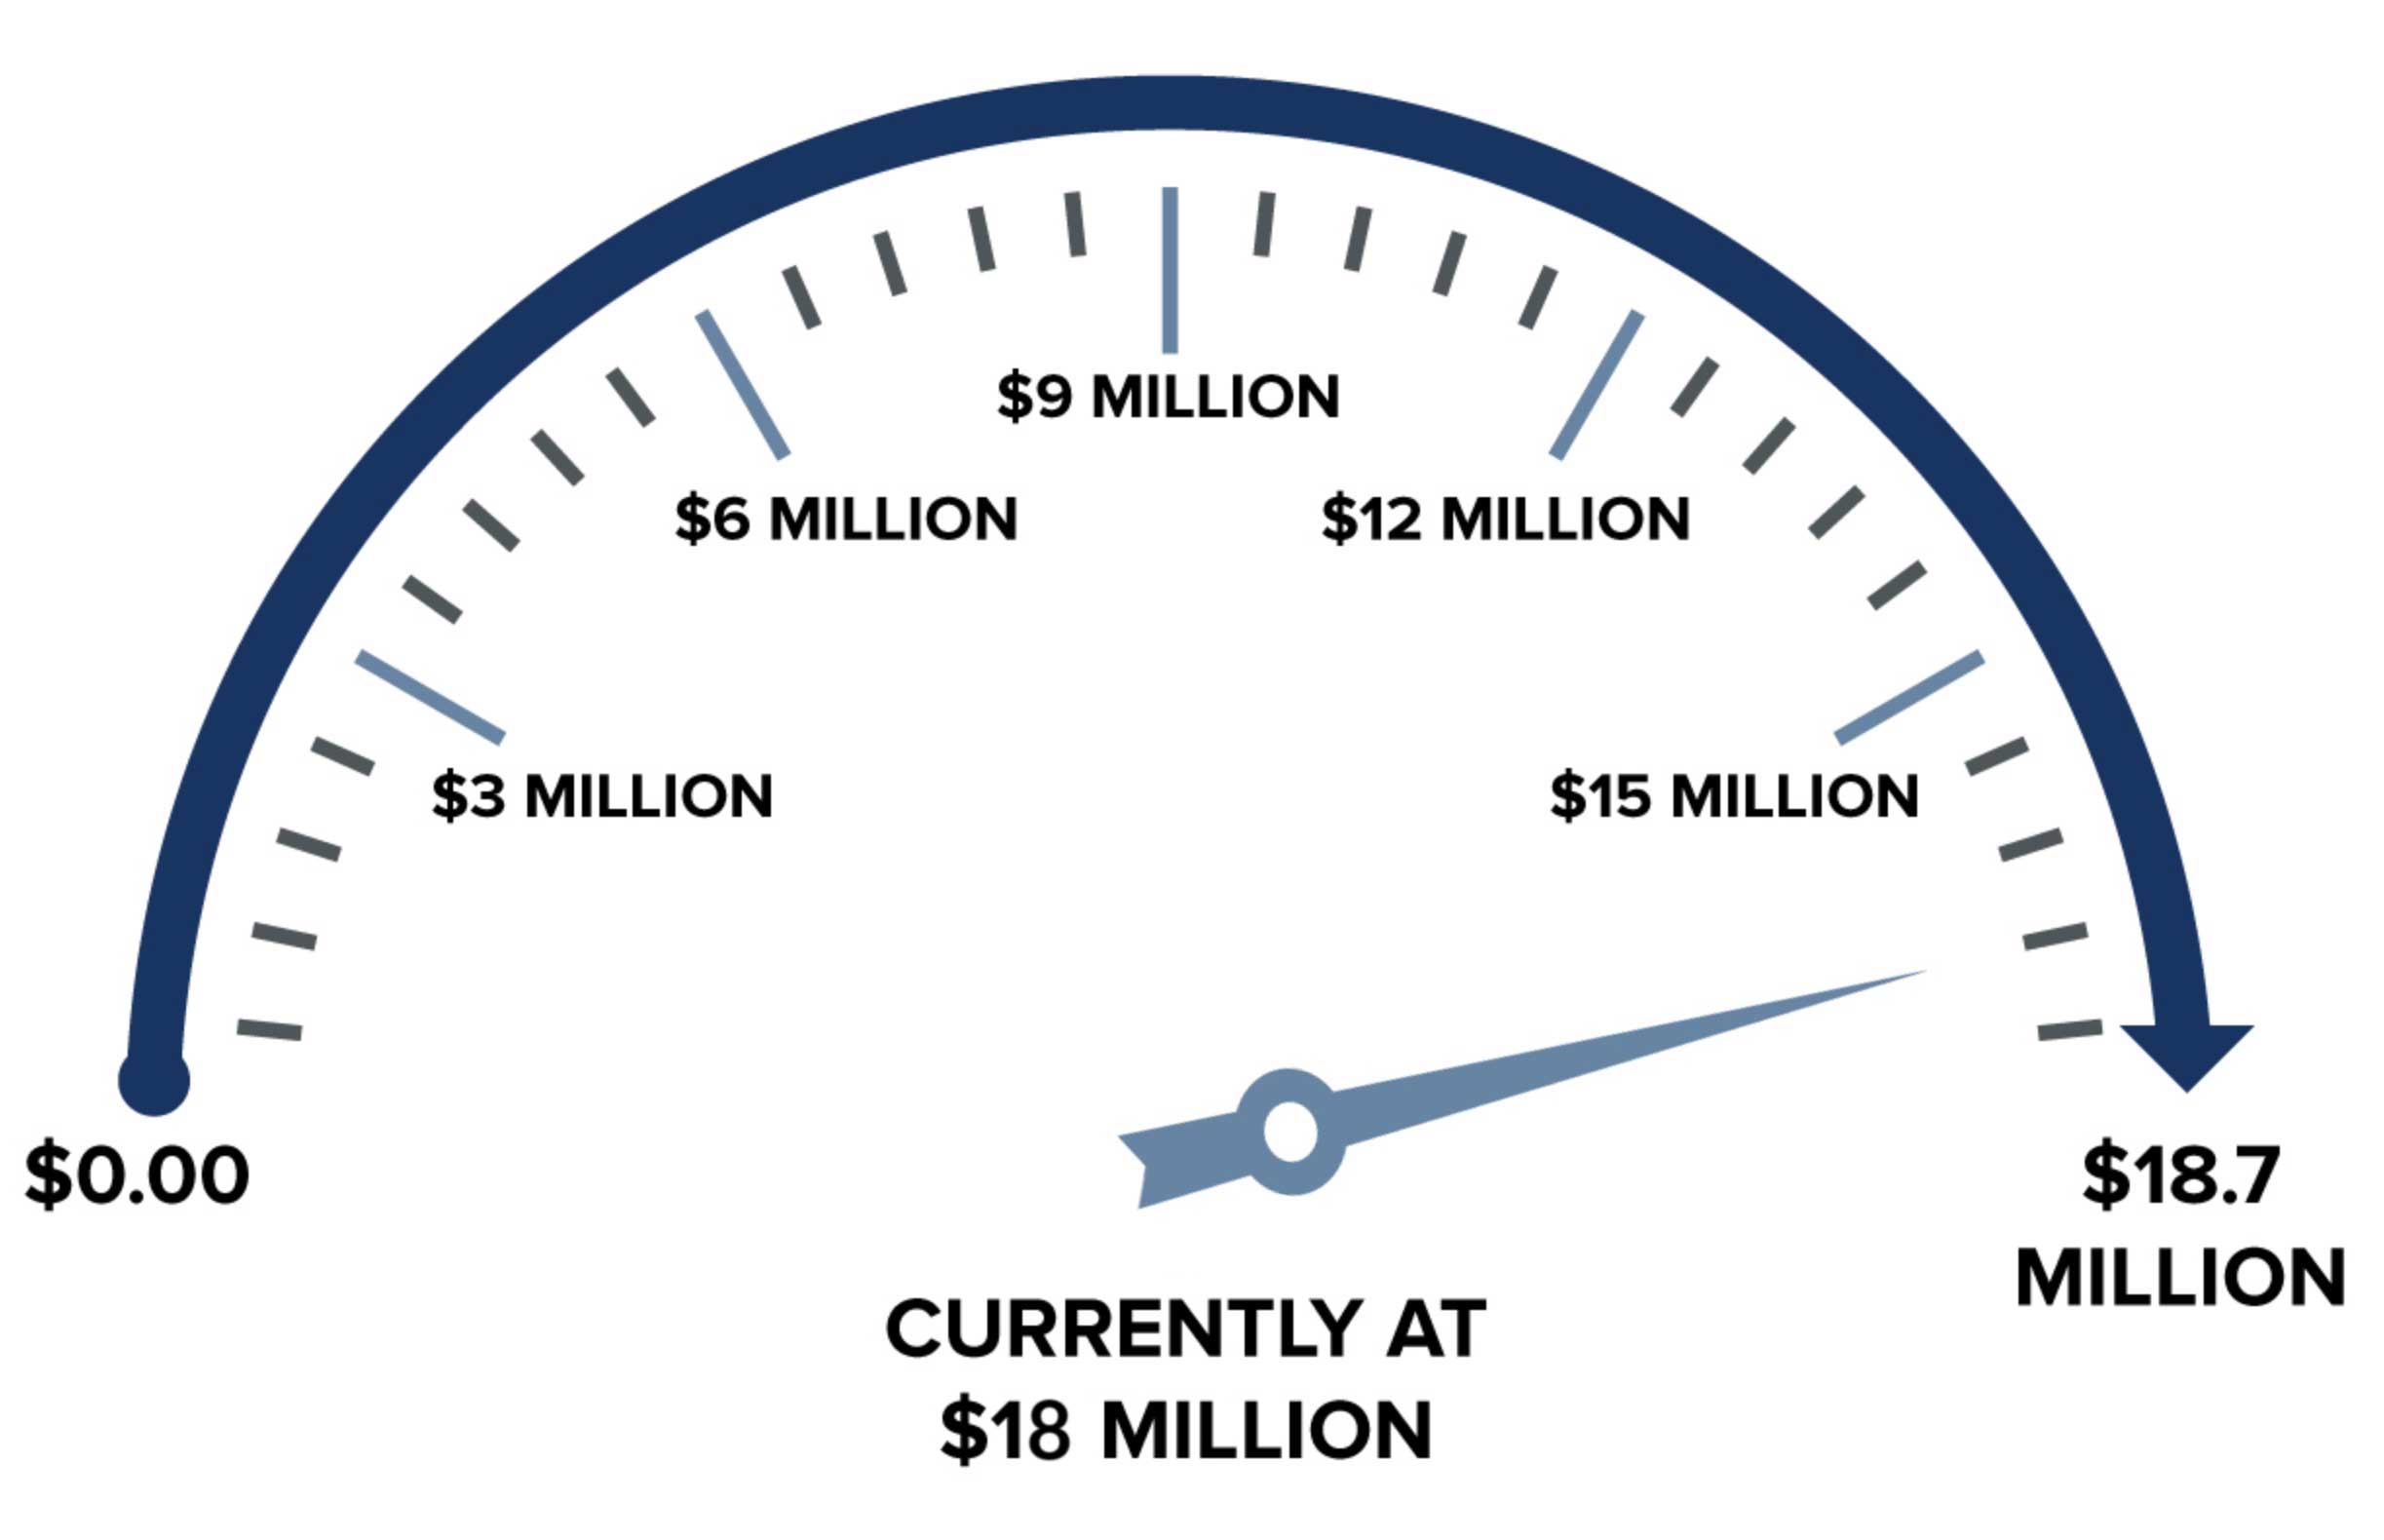 Giving meter. We are currently at $17.6 million with a pledged goal of $18.5 million.